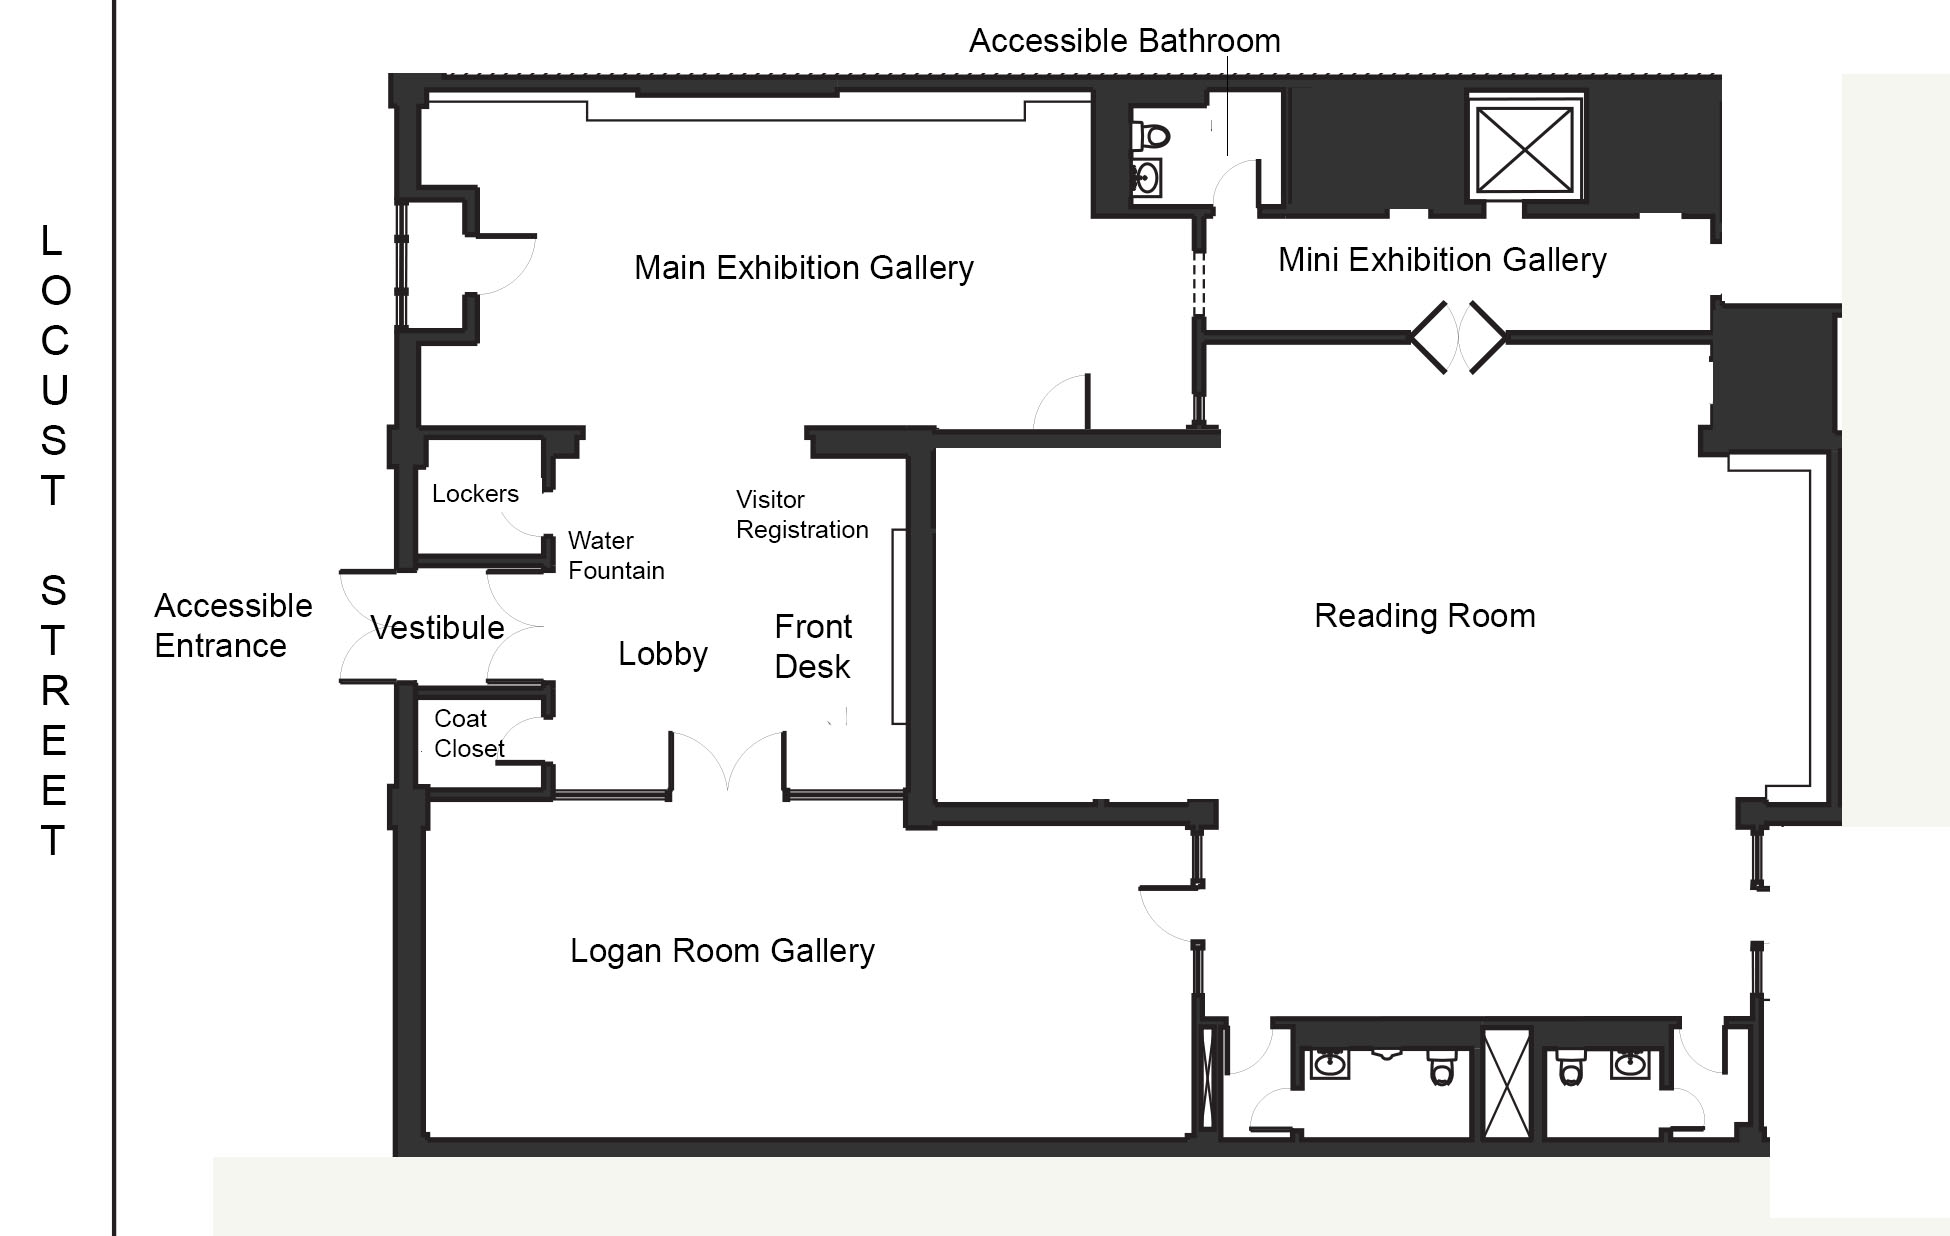 Picture shows first floor plan of the Library. Plan includes areas designated Accessible Entrance, Front Desk, Visitor Registration, Water Fountain, Main Exhibition Gallery, Accessible Bathroom, and Mini Exhibition Gallery. From Front Desk designated spaces move in a clockwise direction.